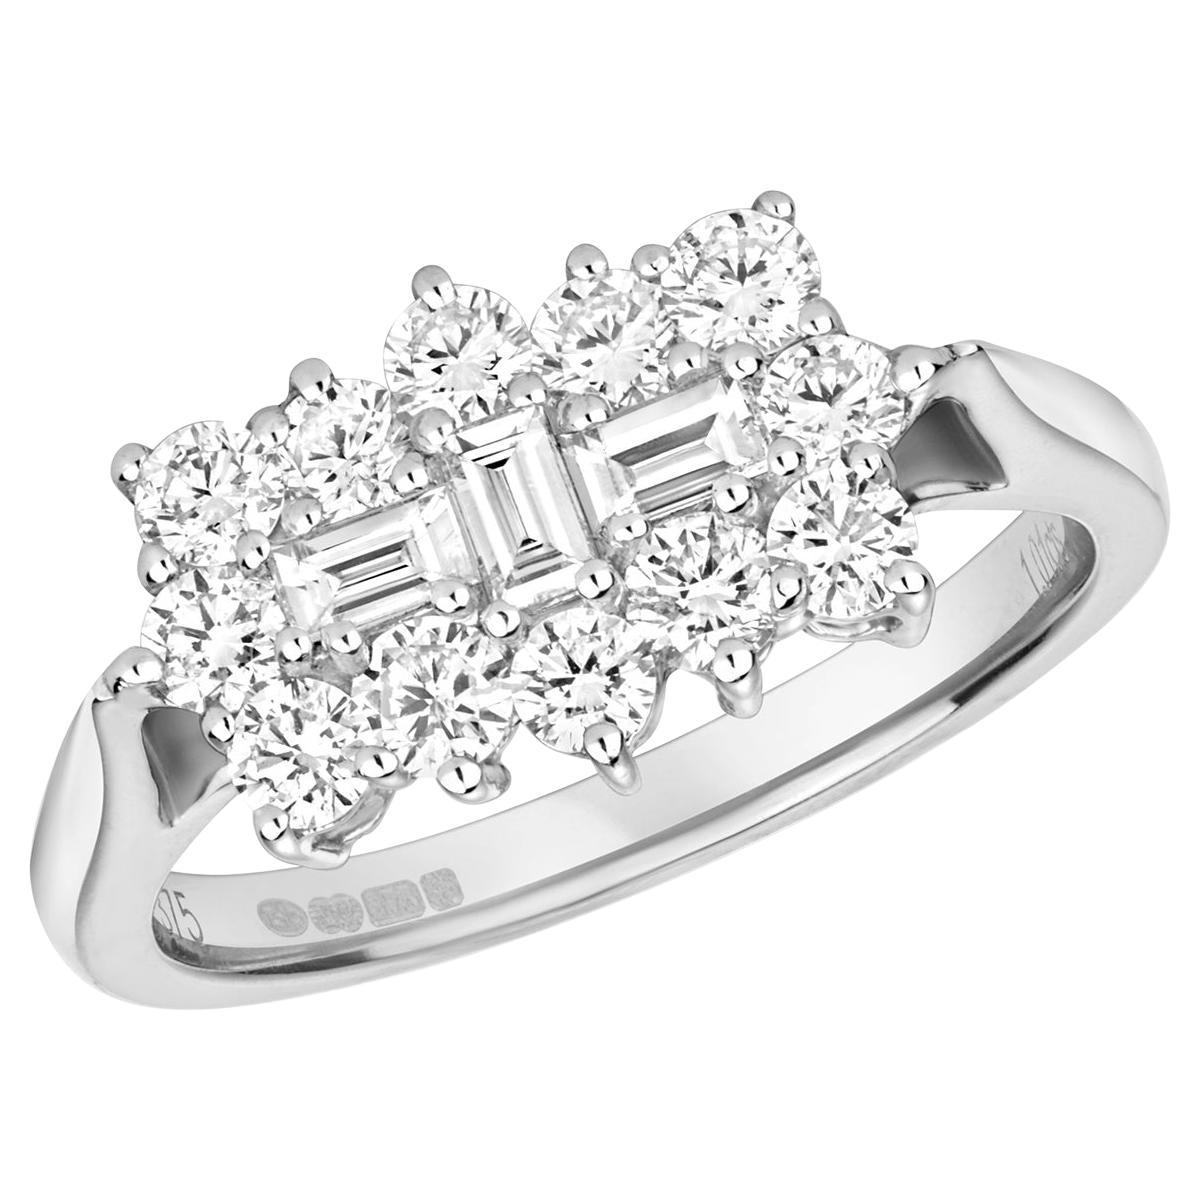 1ct DIAMOND ROUND AND BAGUETTE CLUSTER BOAT RING IN 9CT WHITE GOLD For Sale